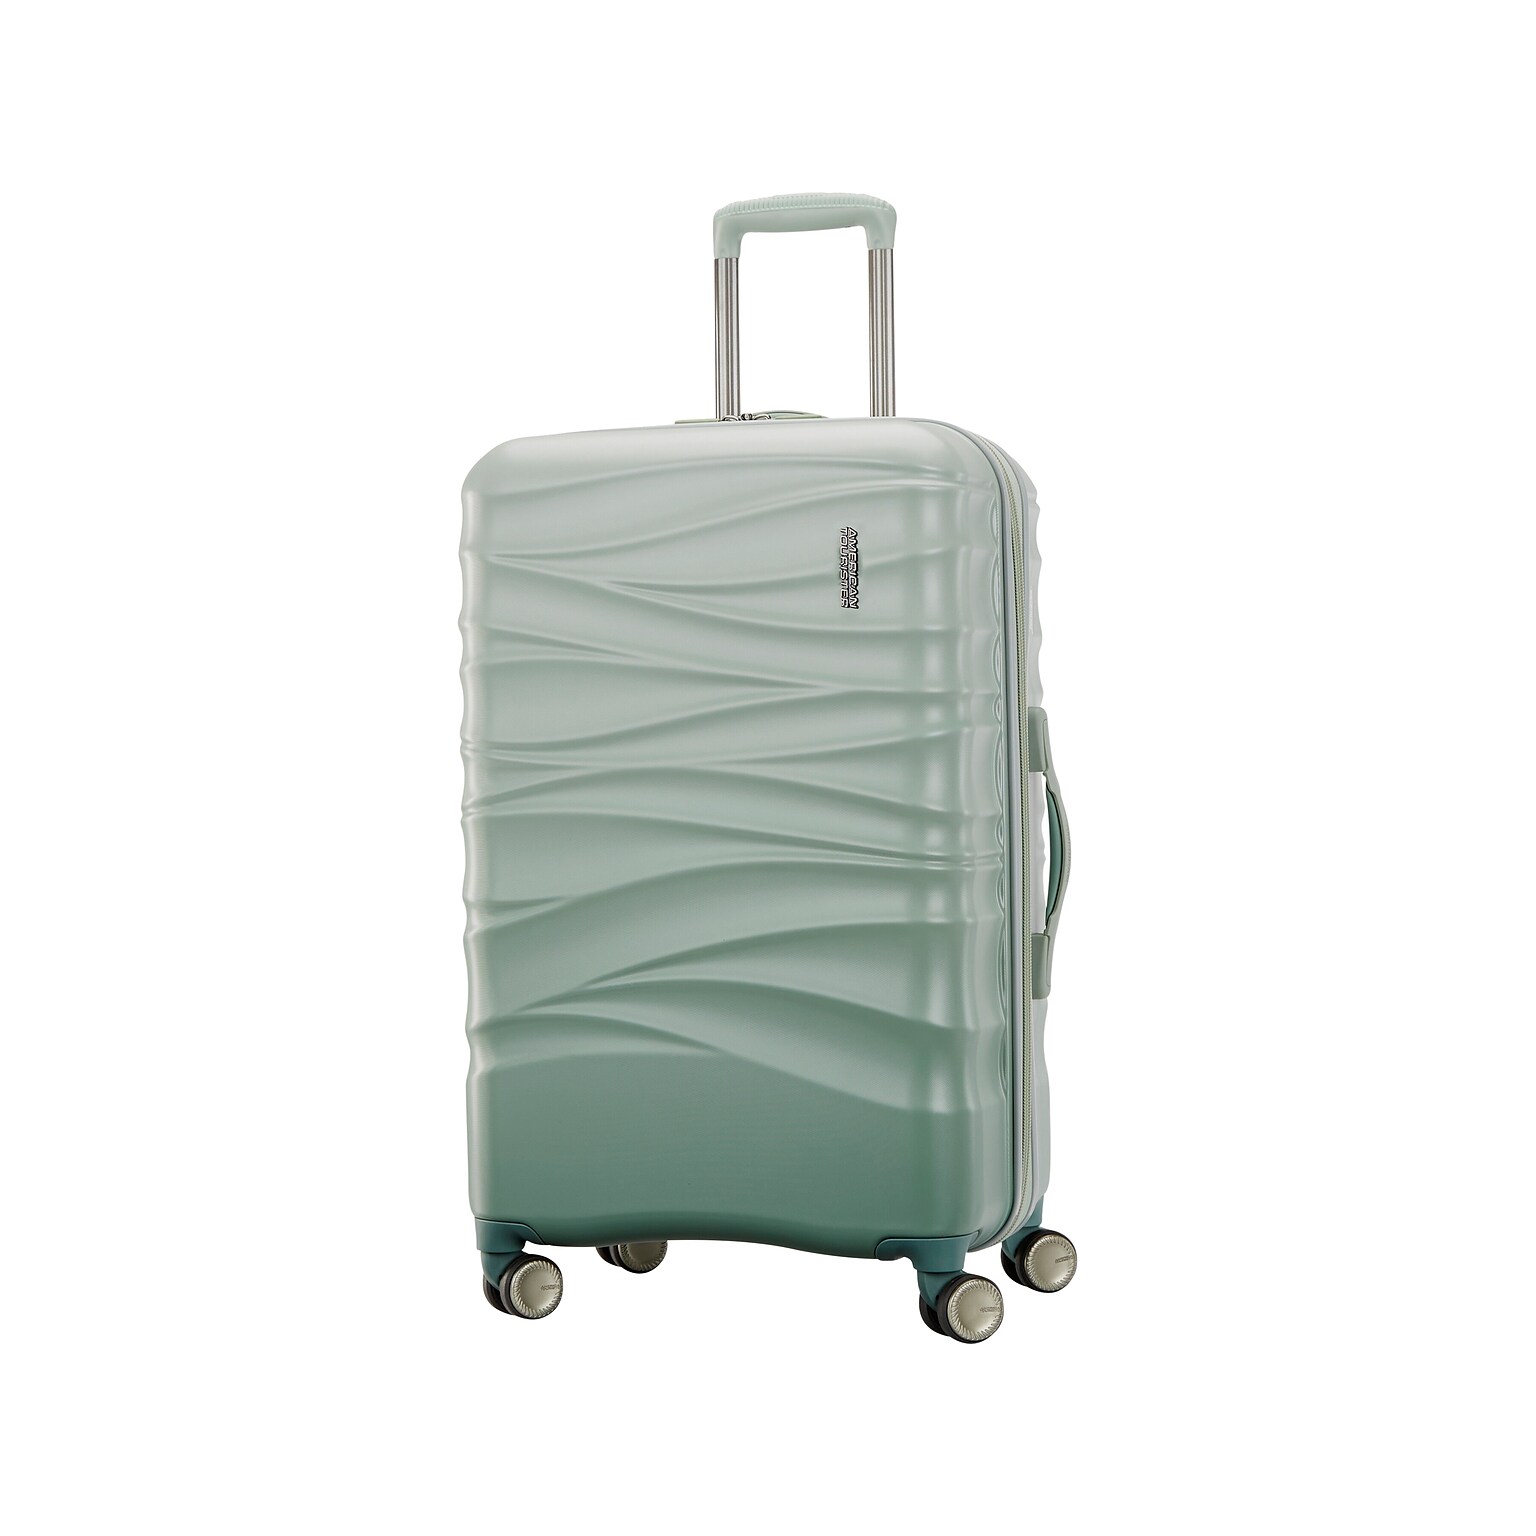 American Tourister Cascade 26.75 Hardside Suitcase, 4-Wheeled Spinner, Sage Green (143245-2017)